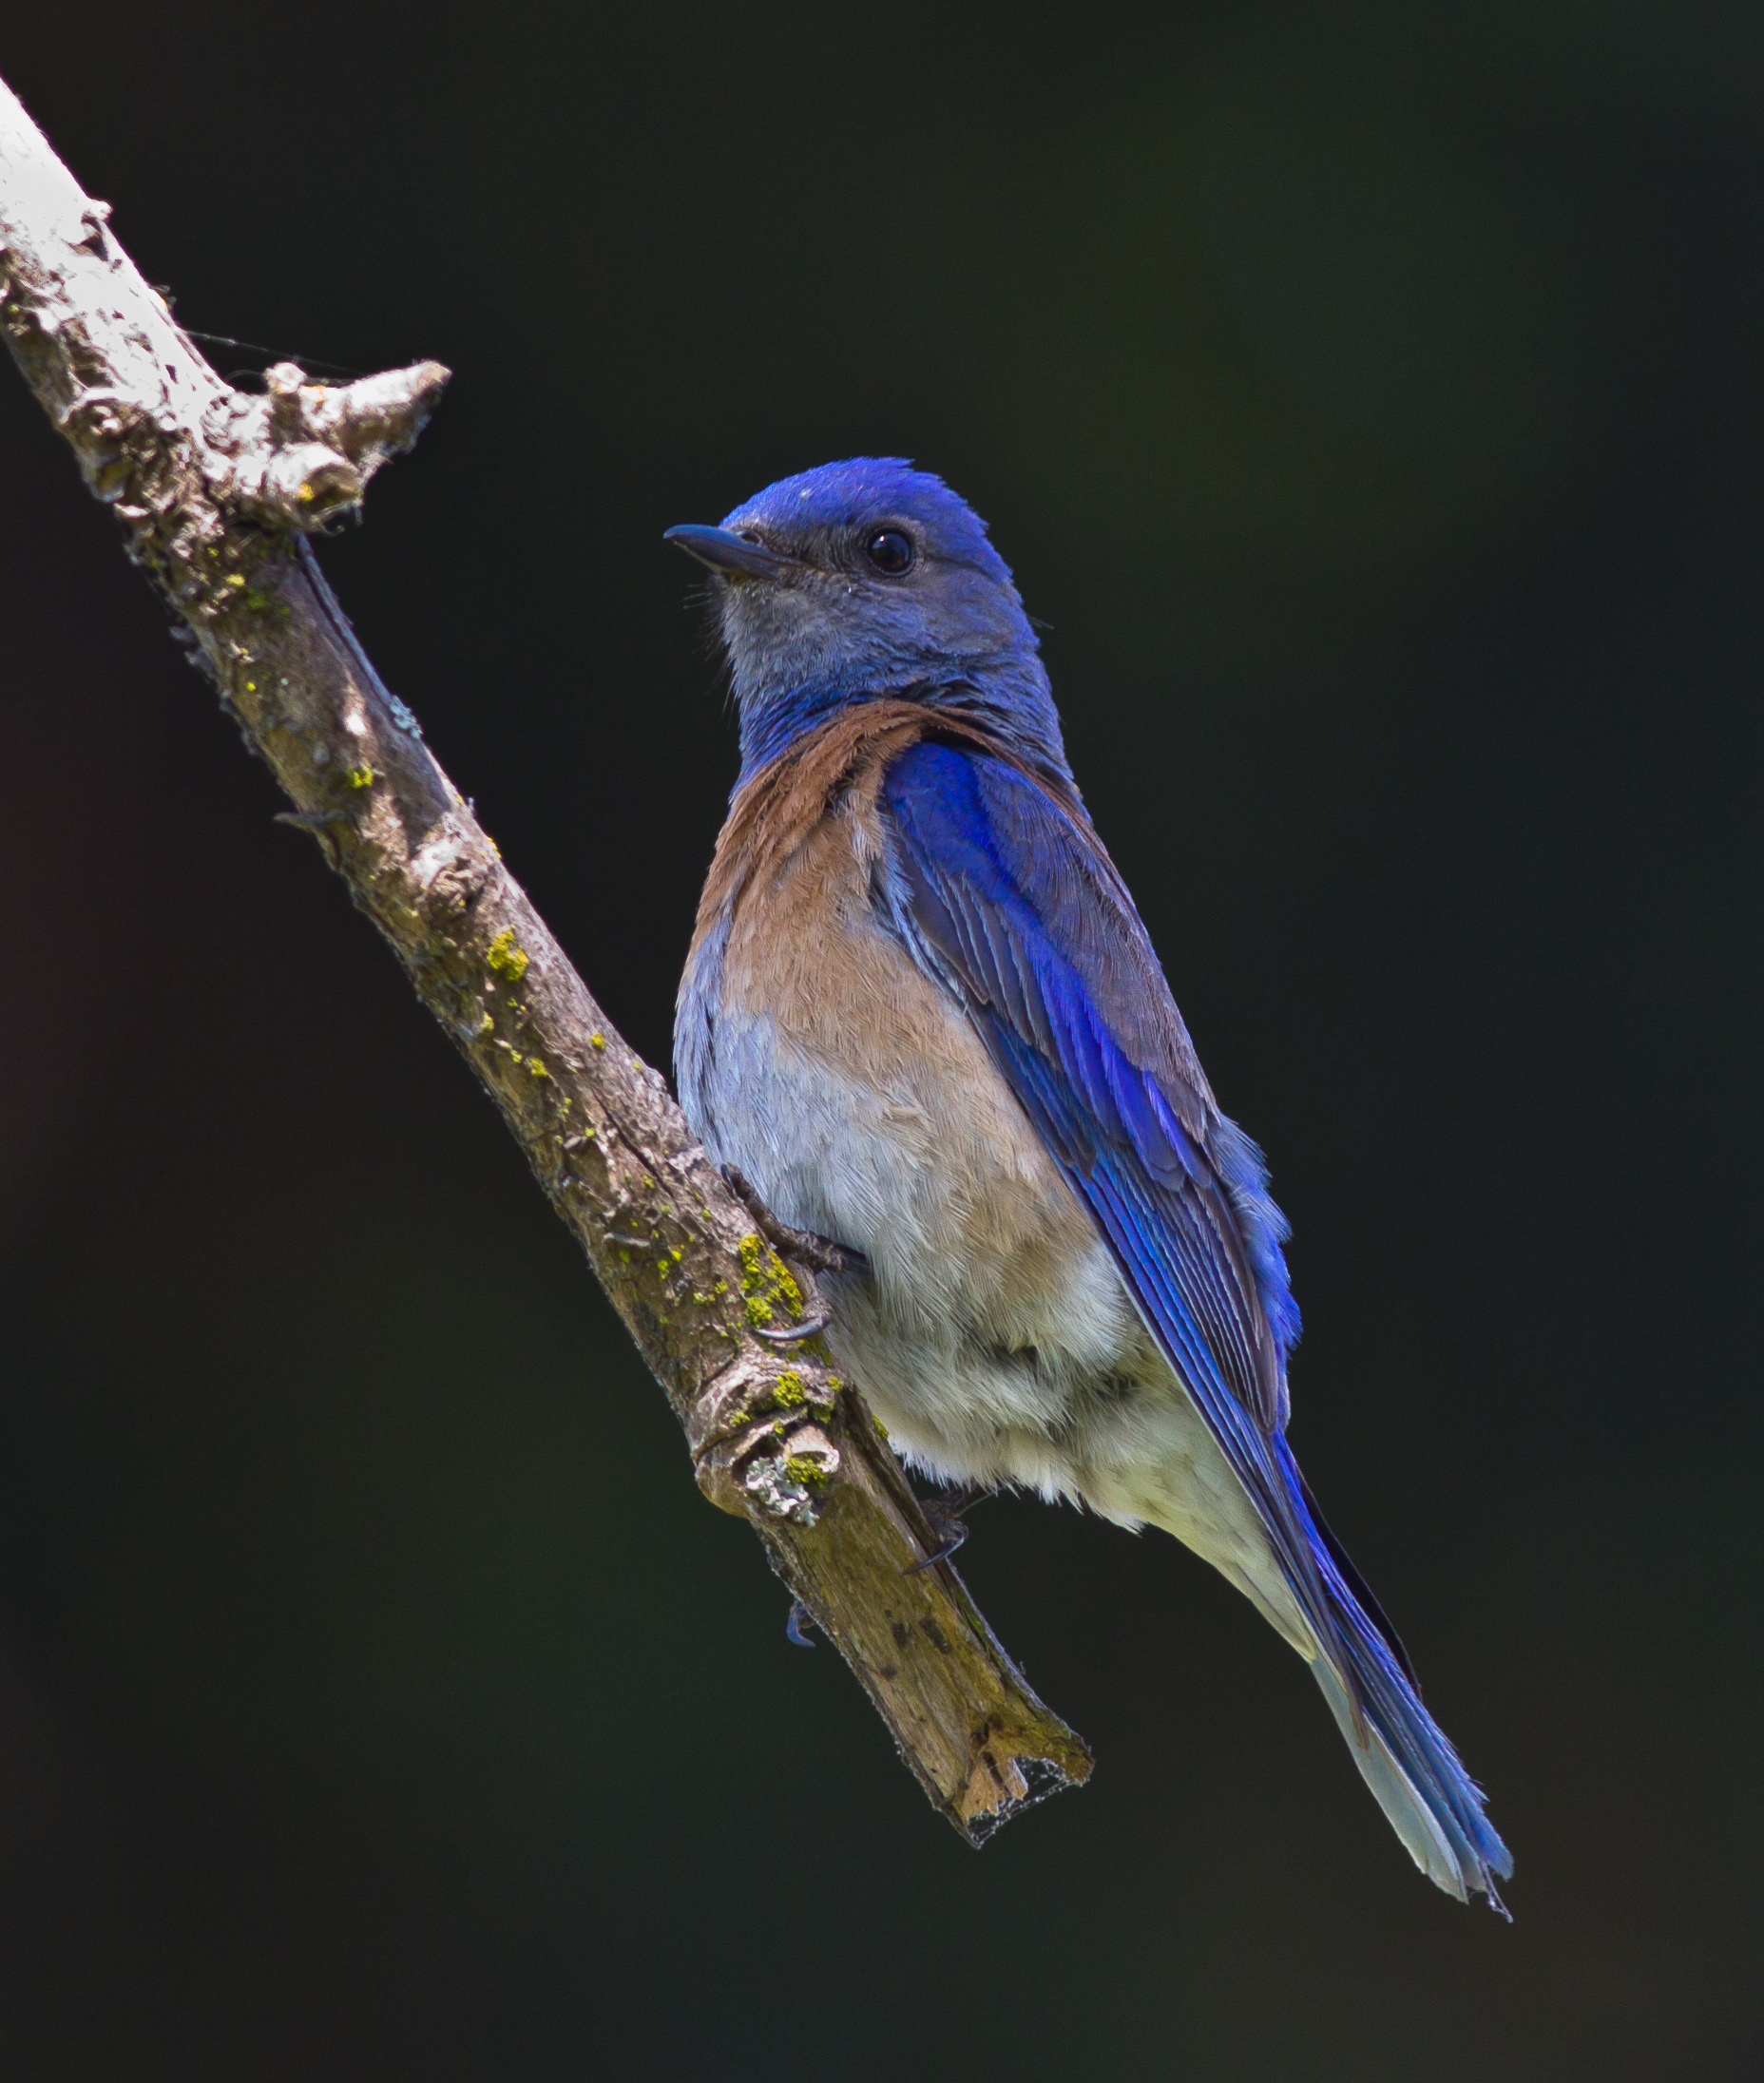 Male Western bluebirds attract a lot of attention with their brilliant colors. (Allen Hirsch)